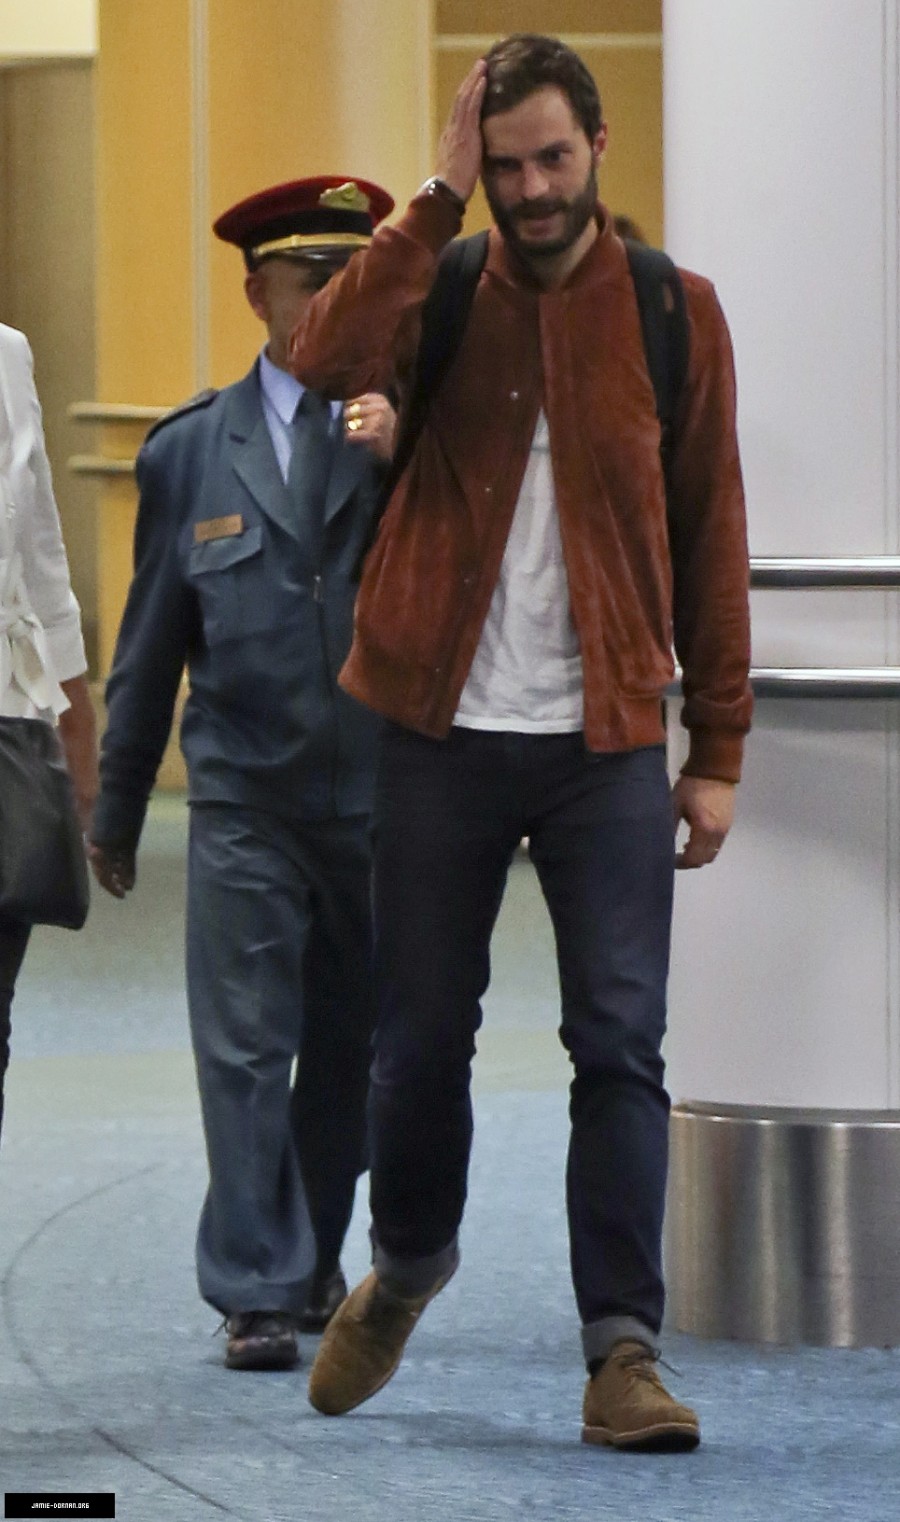 Arriving in Vancouver on October 11, 2014, Jamie Dornan showcased a smart casual ensemble with selvedge denim jeans and a classic white t-shirt paired with a suede bomber jacket and shoes. Dornan is in town to reshoot scenes for 'Fifty Shades of Grey', which comes out February 14, 2015.